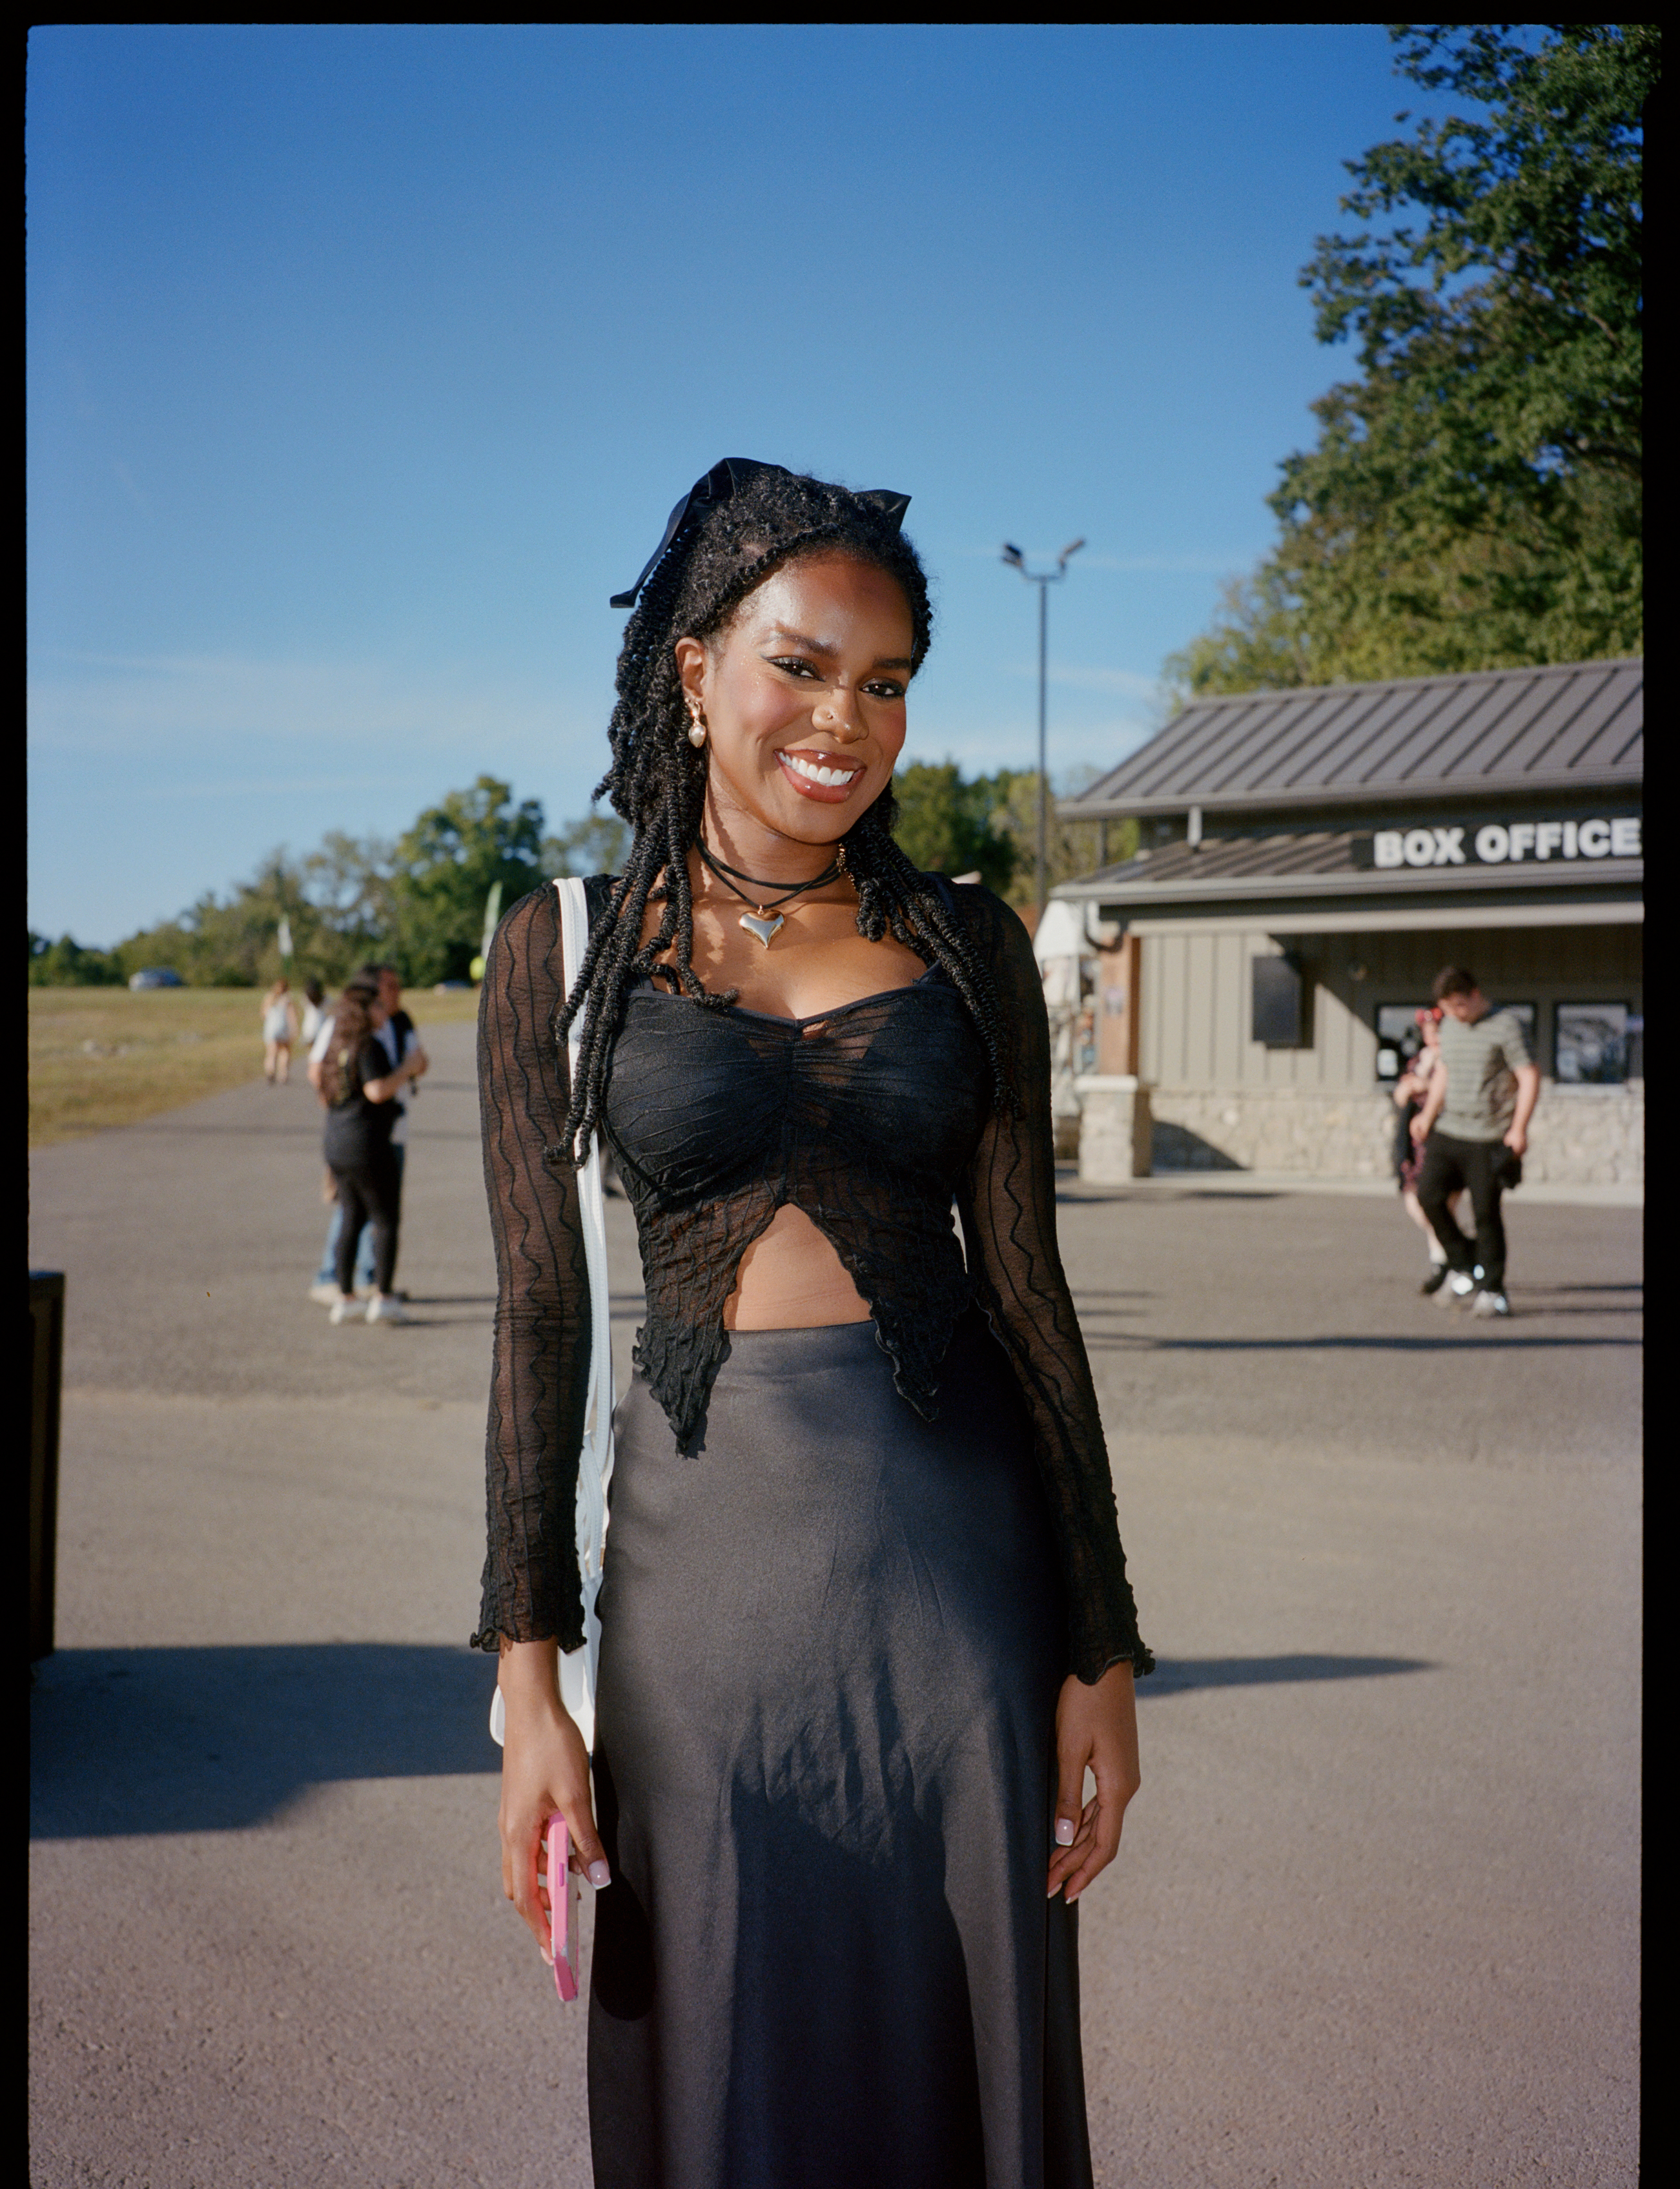 a lana del rey fan stands outside the pavilion at one of her shows. she has black braids in her hair and is wearing a black skirt and a sheer black top.